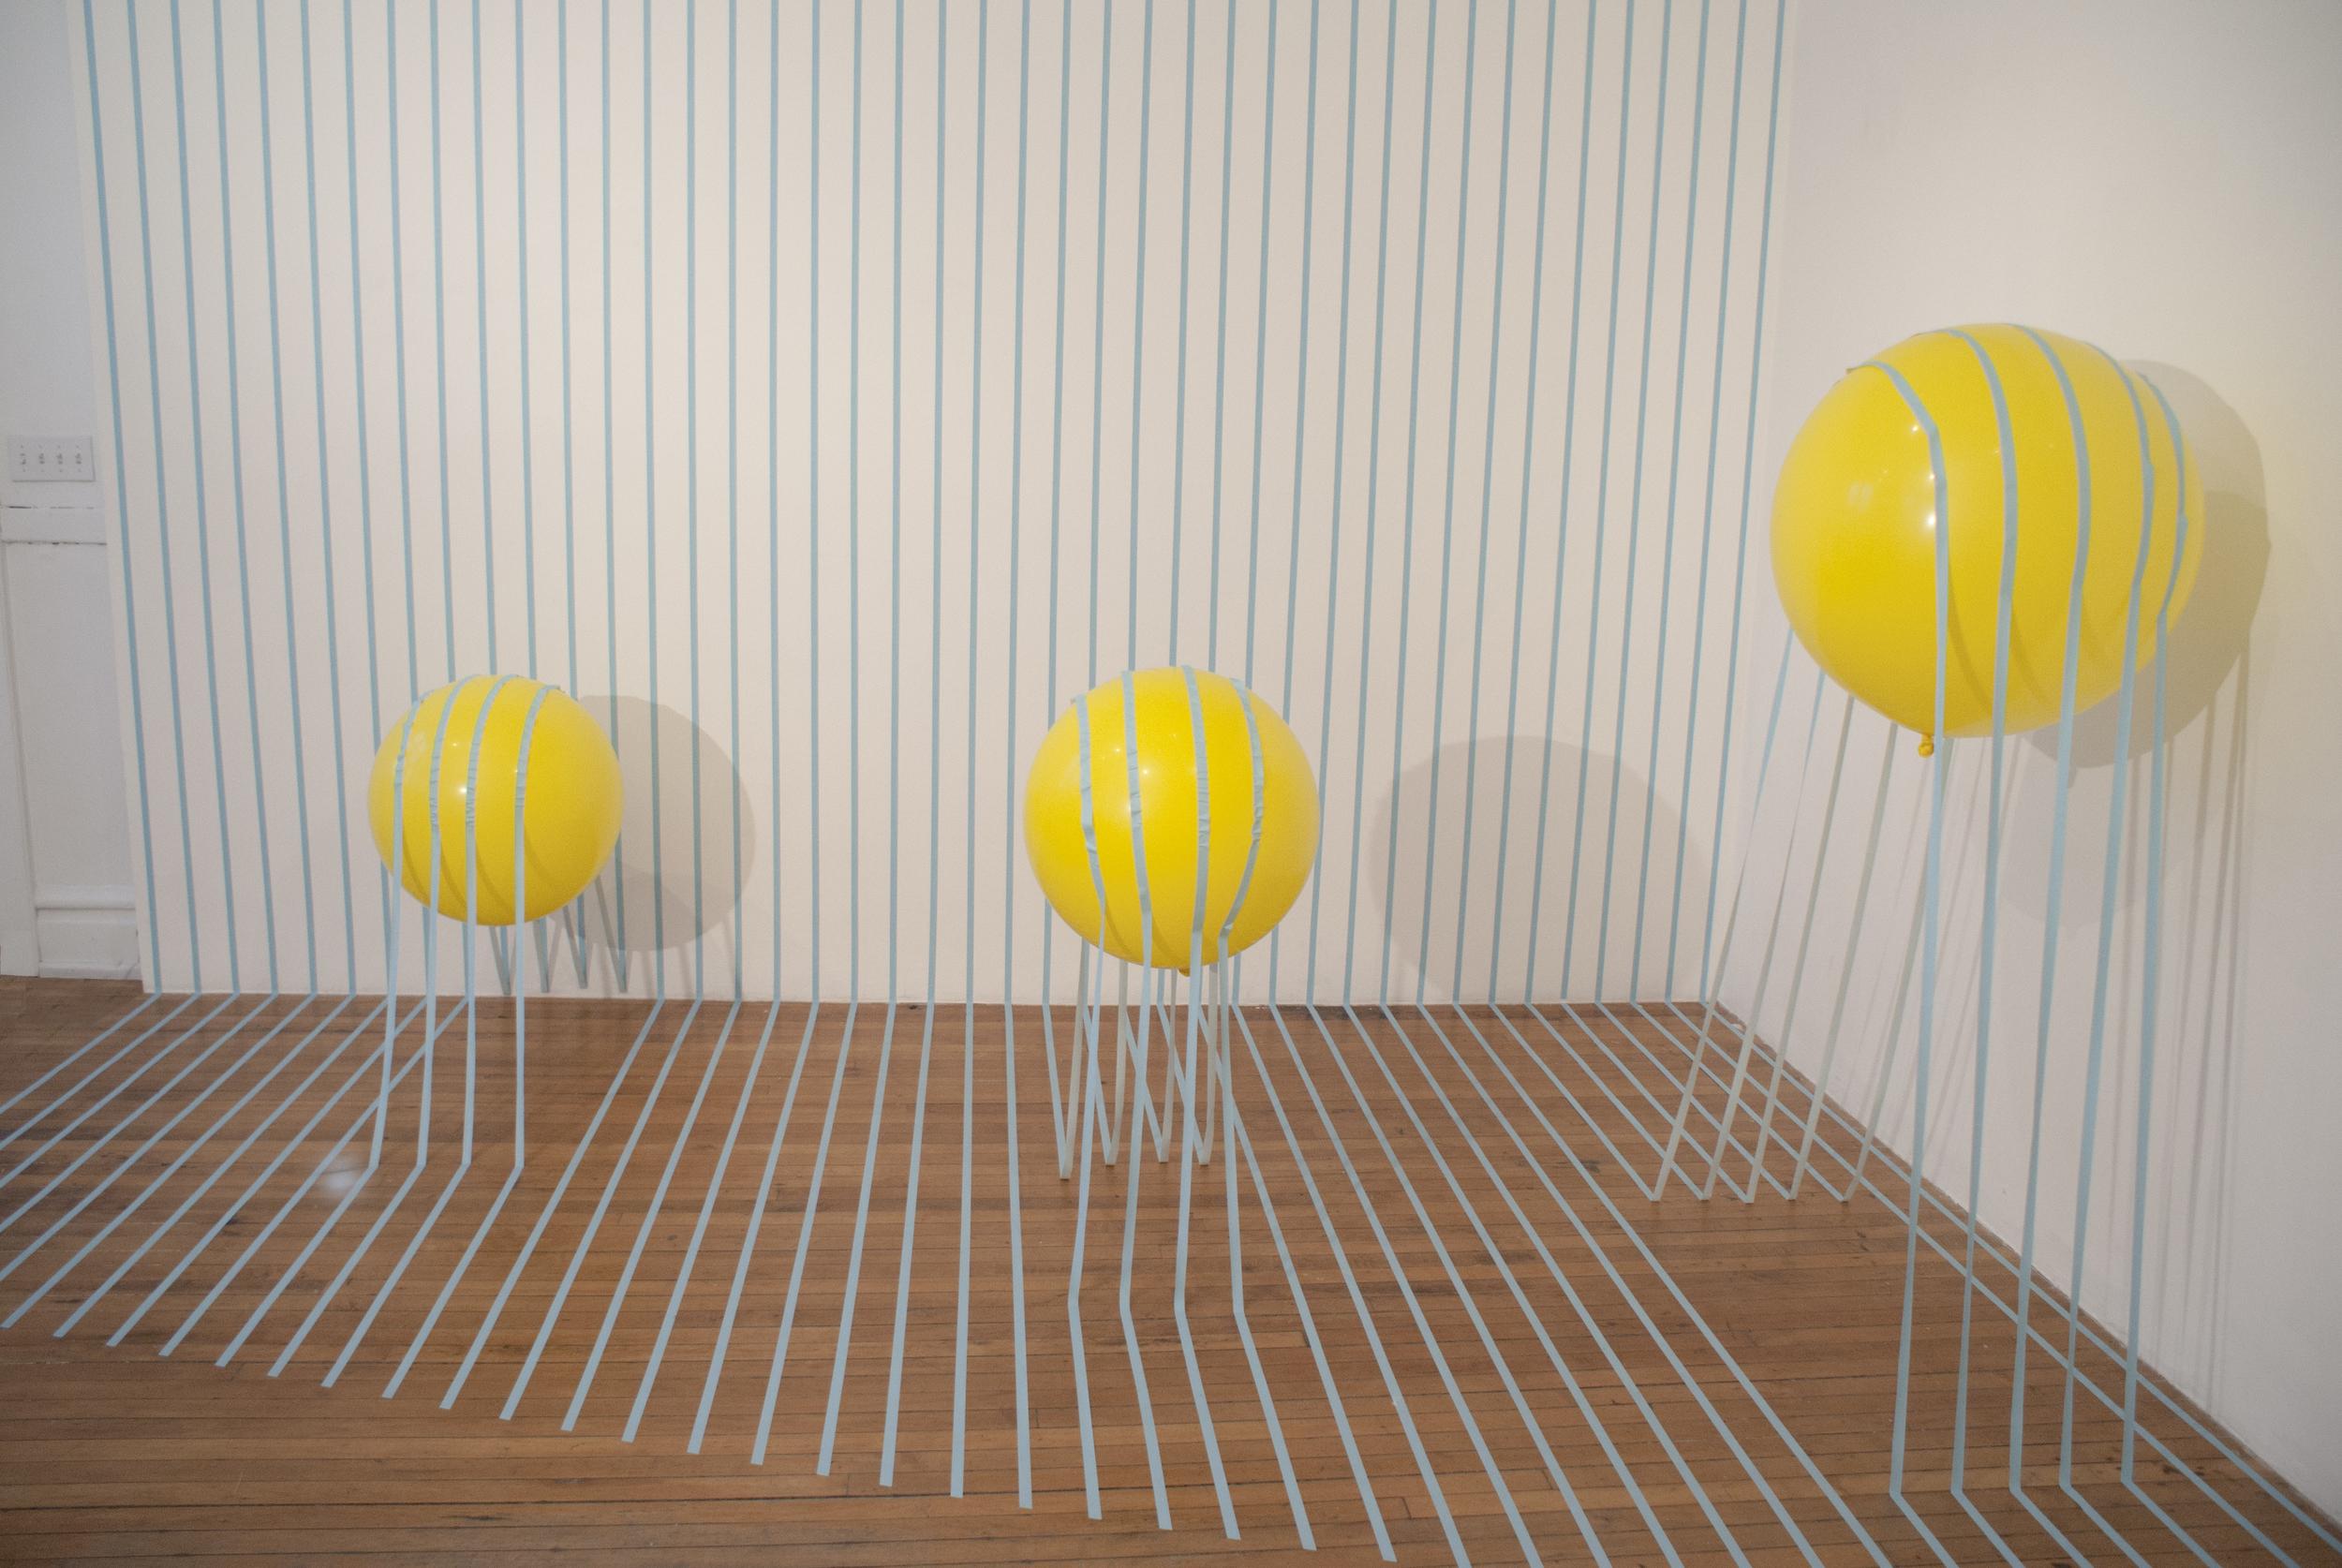   Buoyant Loss   2014  artist tape, balloon, and helium  120”x180”x120” 